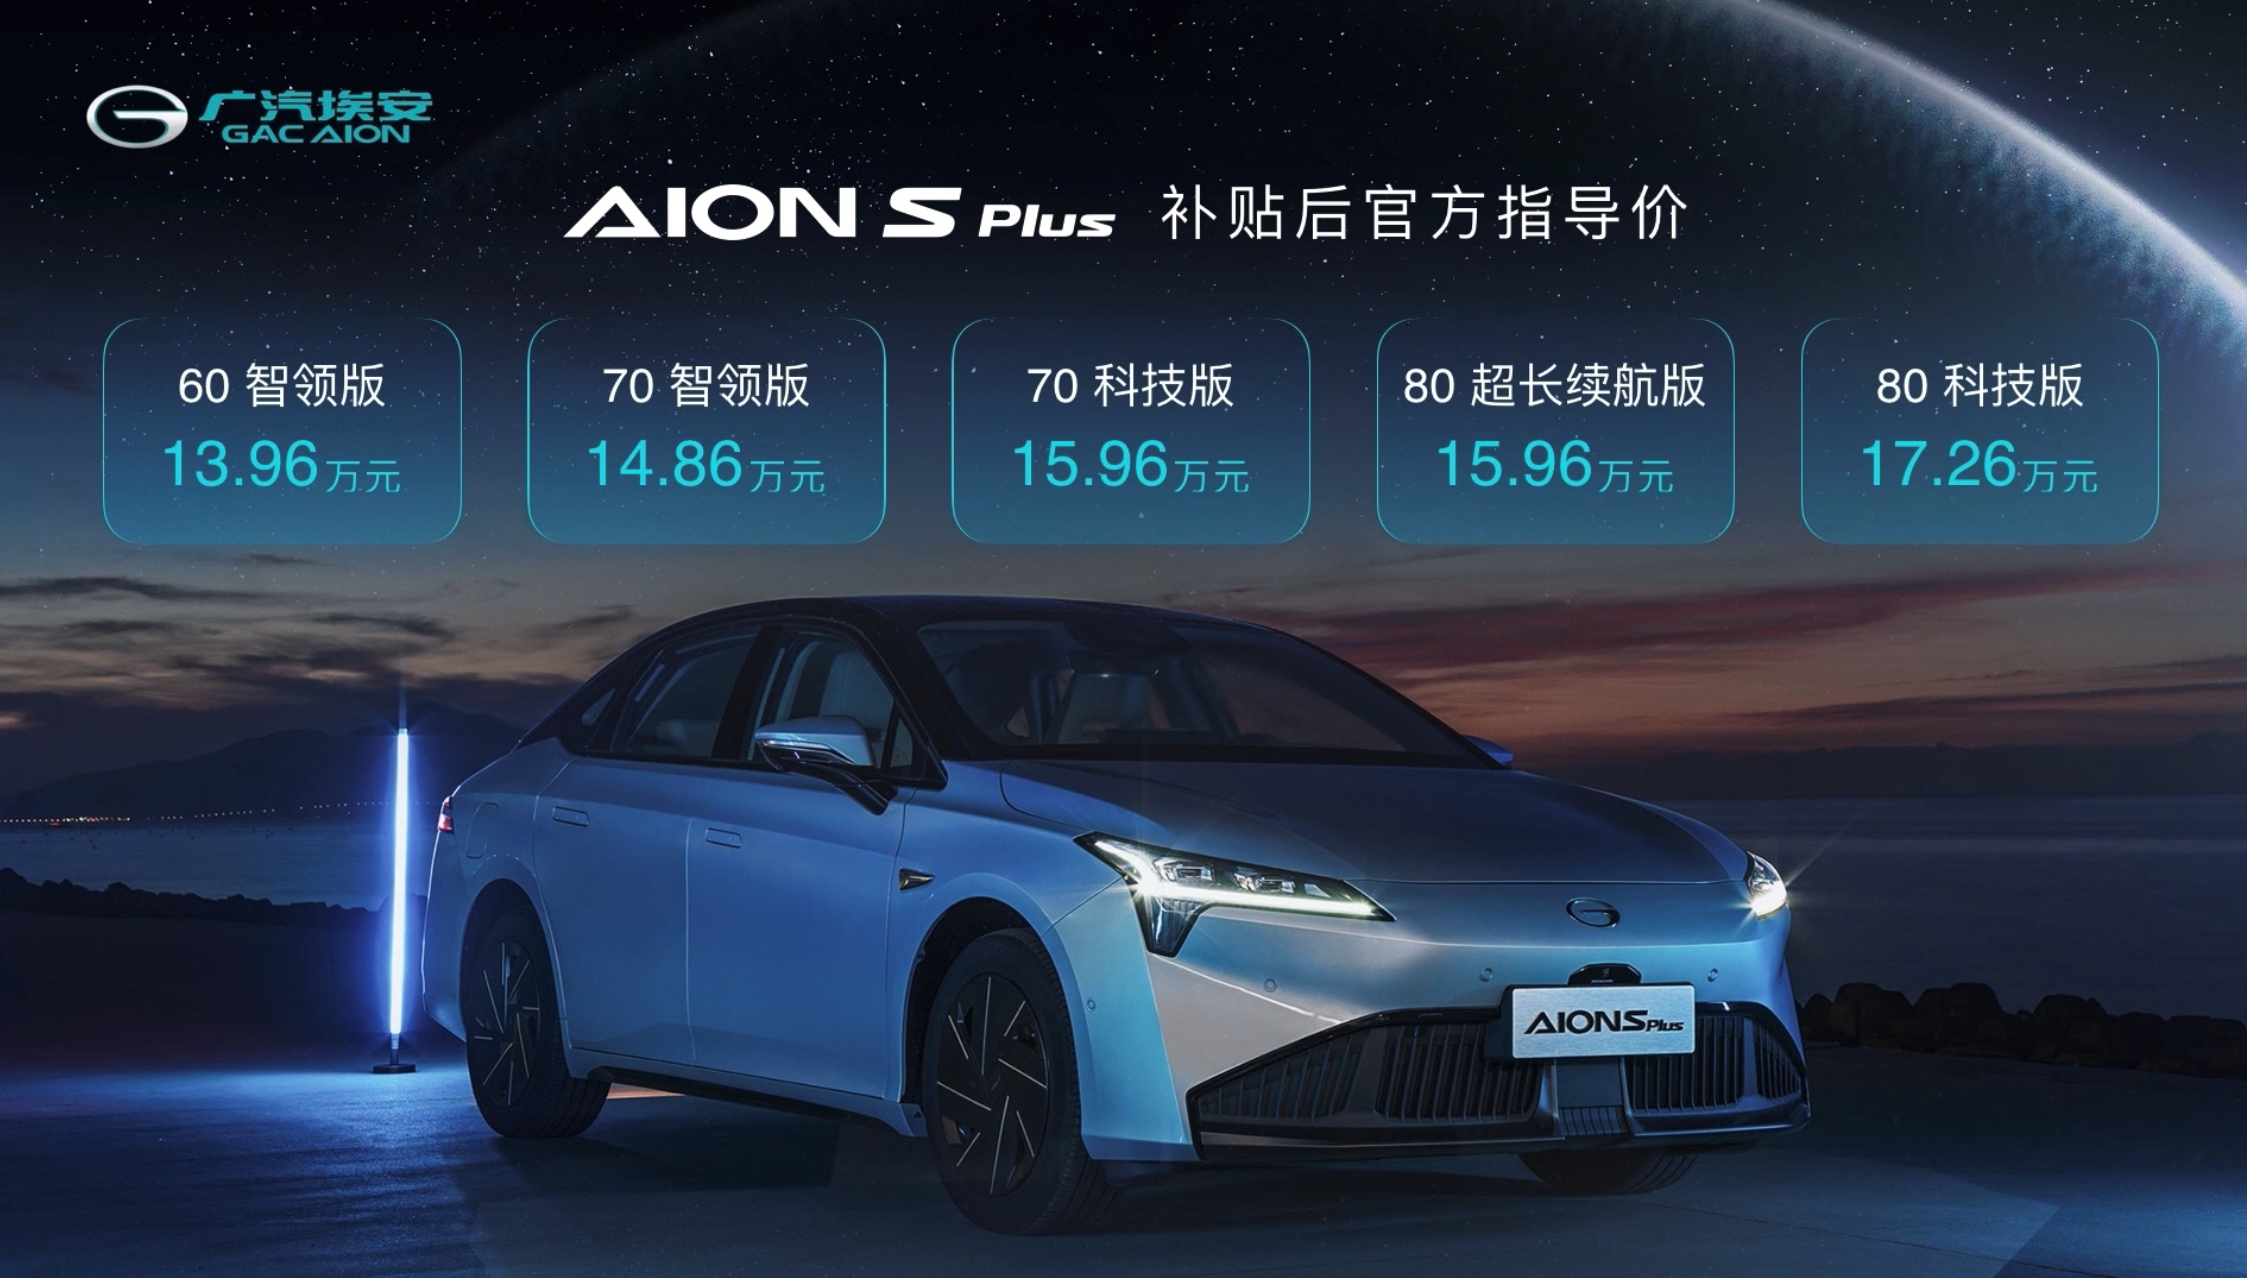 GAC AION S PLUS is officially launched, with a price range from 139,600 yuan to 172,600 yuan.